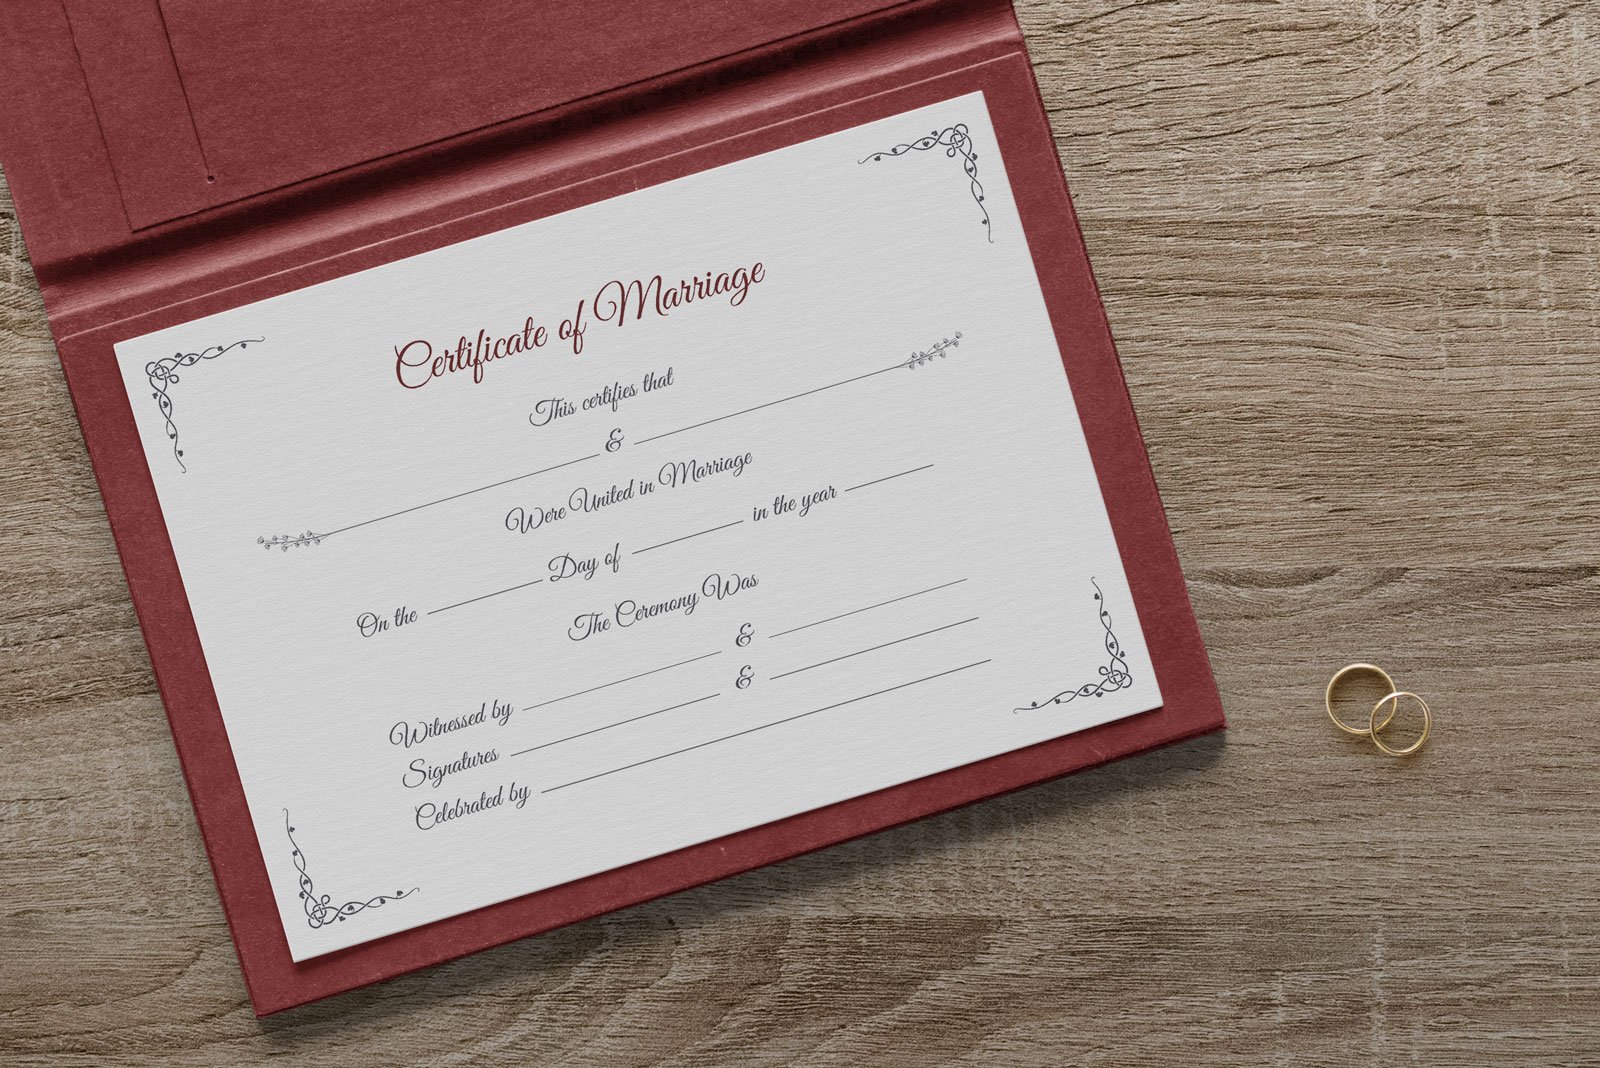 Free Certificate of Marriage Template in Ai & Mockup PSD - Designbolts Pertaining To Certificate Of Marriage Template